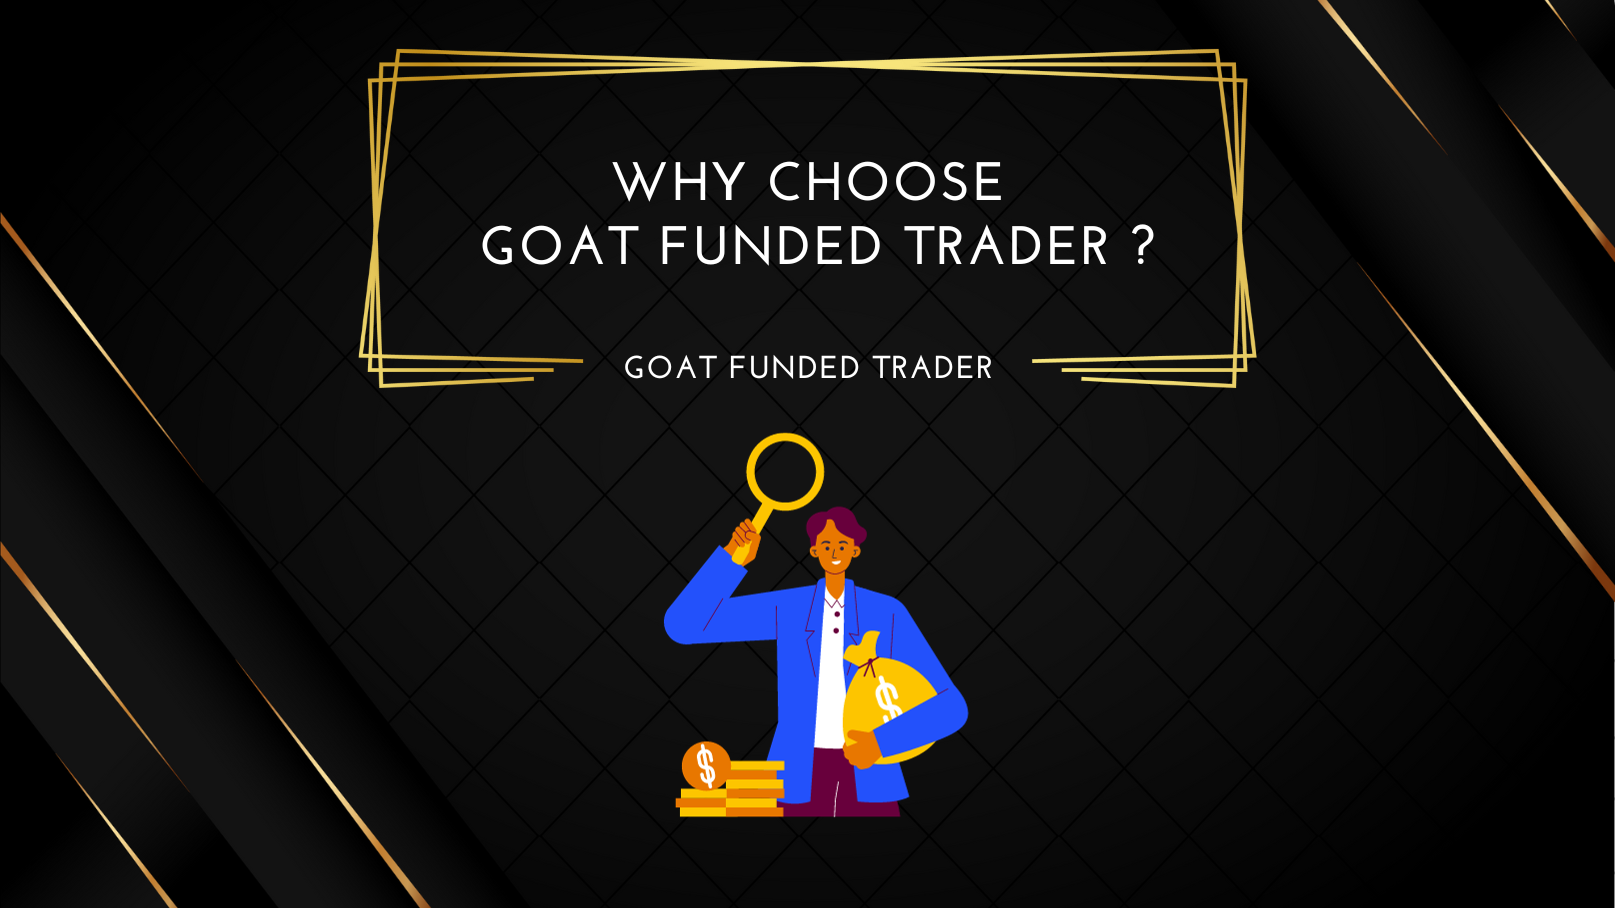 Here is why you should choose Goat Funded Trader- a game-changer in the prop trading world.